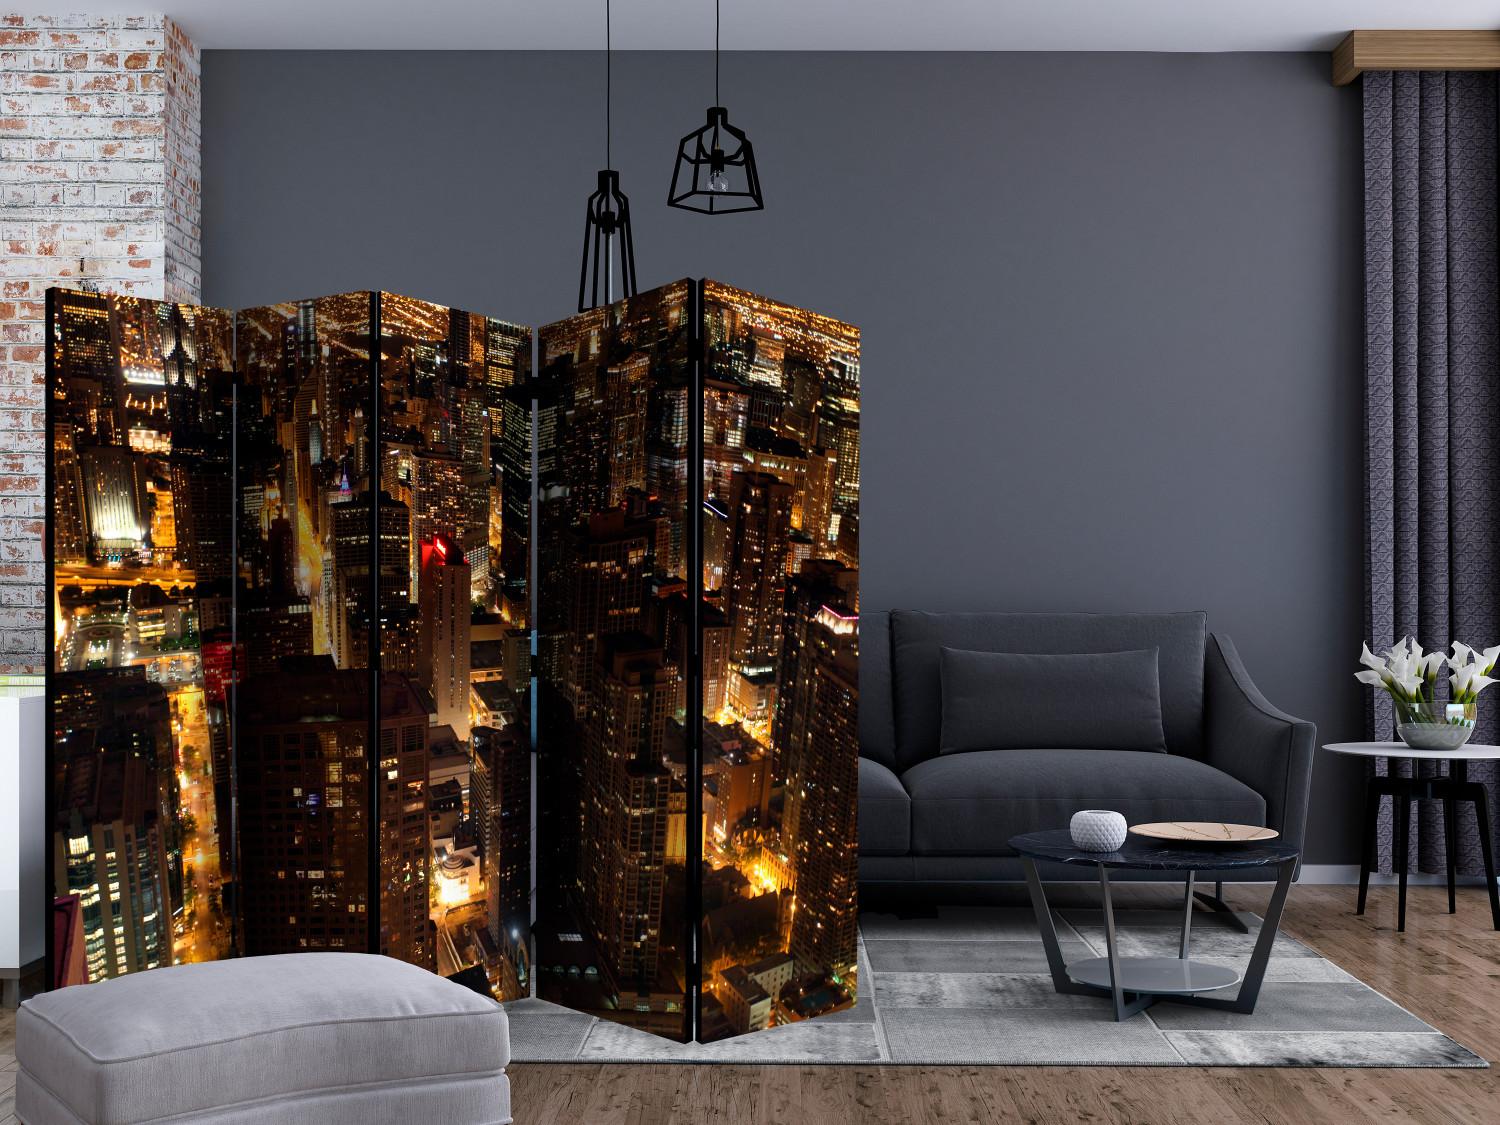 Biombo City by night - Chicago, USA II [Room Dividers]